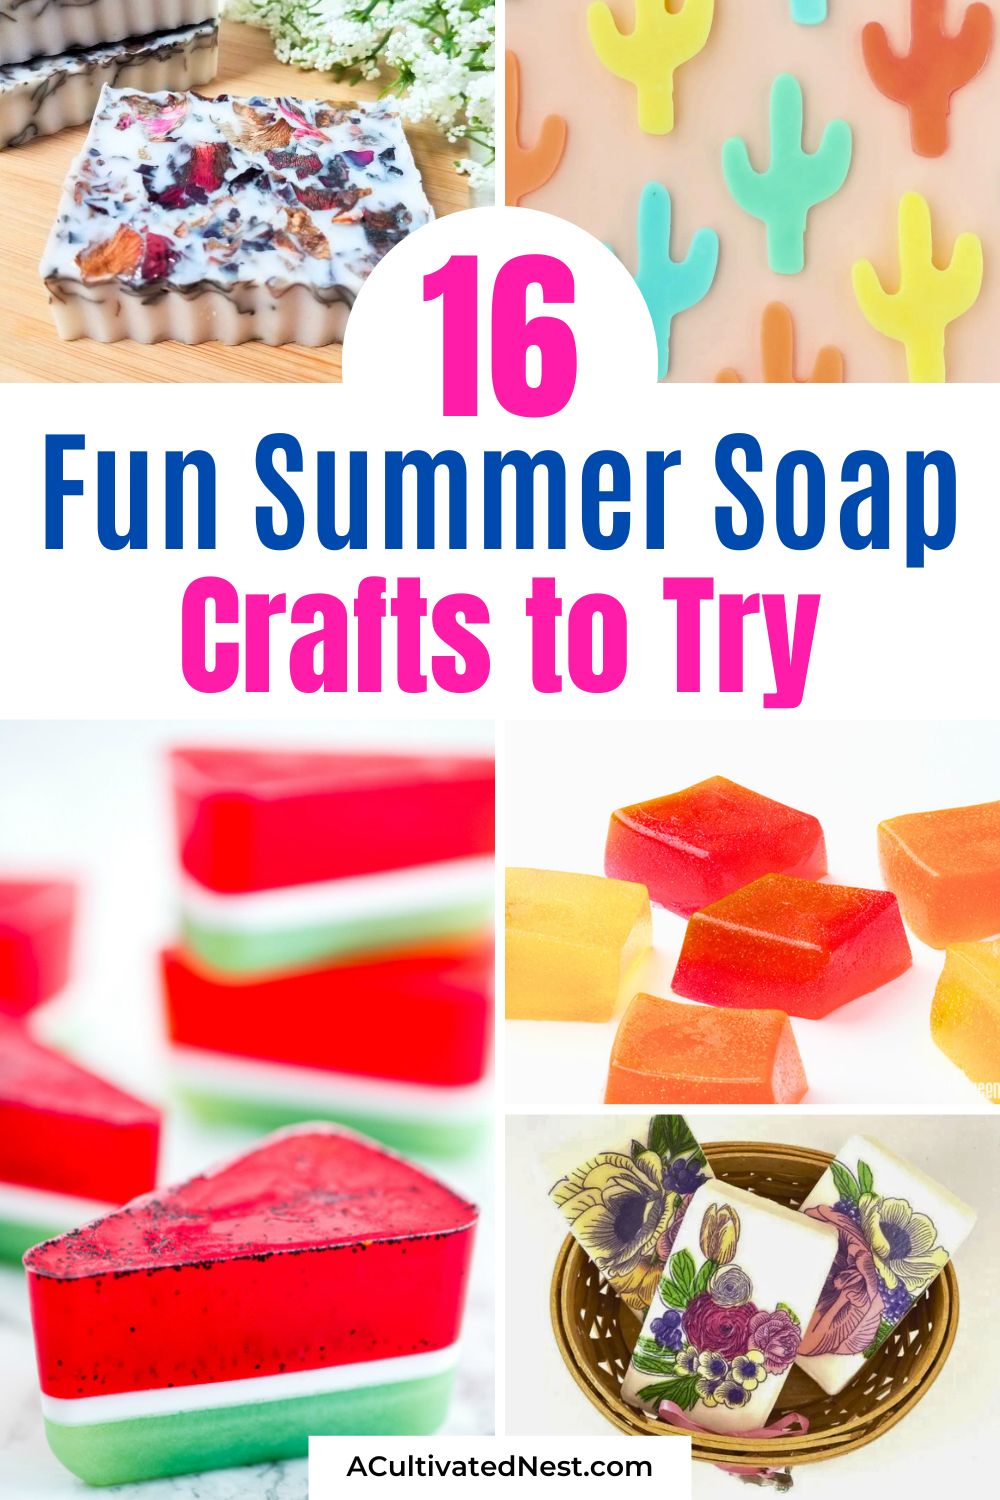 16 Fun Summer Soap Crafts- Looking for a fun summer activity? Try these DIY summer soap crafts! From fruity designs to cool shapes, these soap-making projects are perfect for a sunny day. Unleash your creativity and make some beautiful soaps! | #SummerCrafts #DIYSoap #CraftIdeas #soapMaking #ACultivatedNest